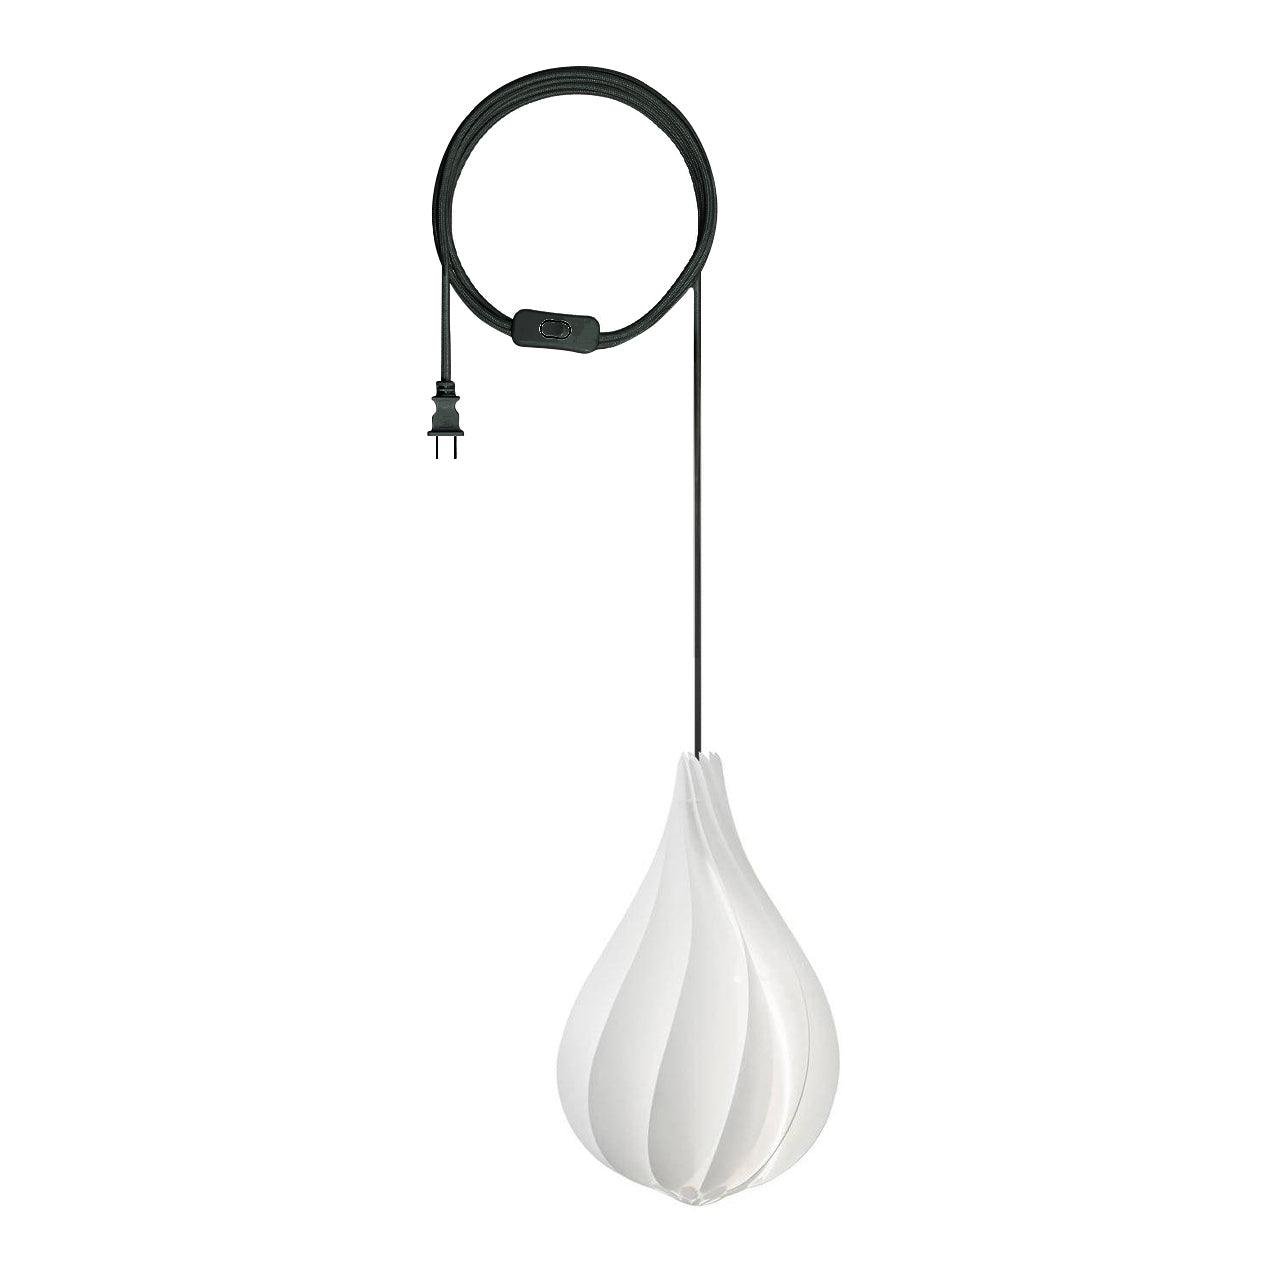 Alva White Pendant Light with Plug, measuring 9.4" in Diameter and 16.5" in Height